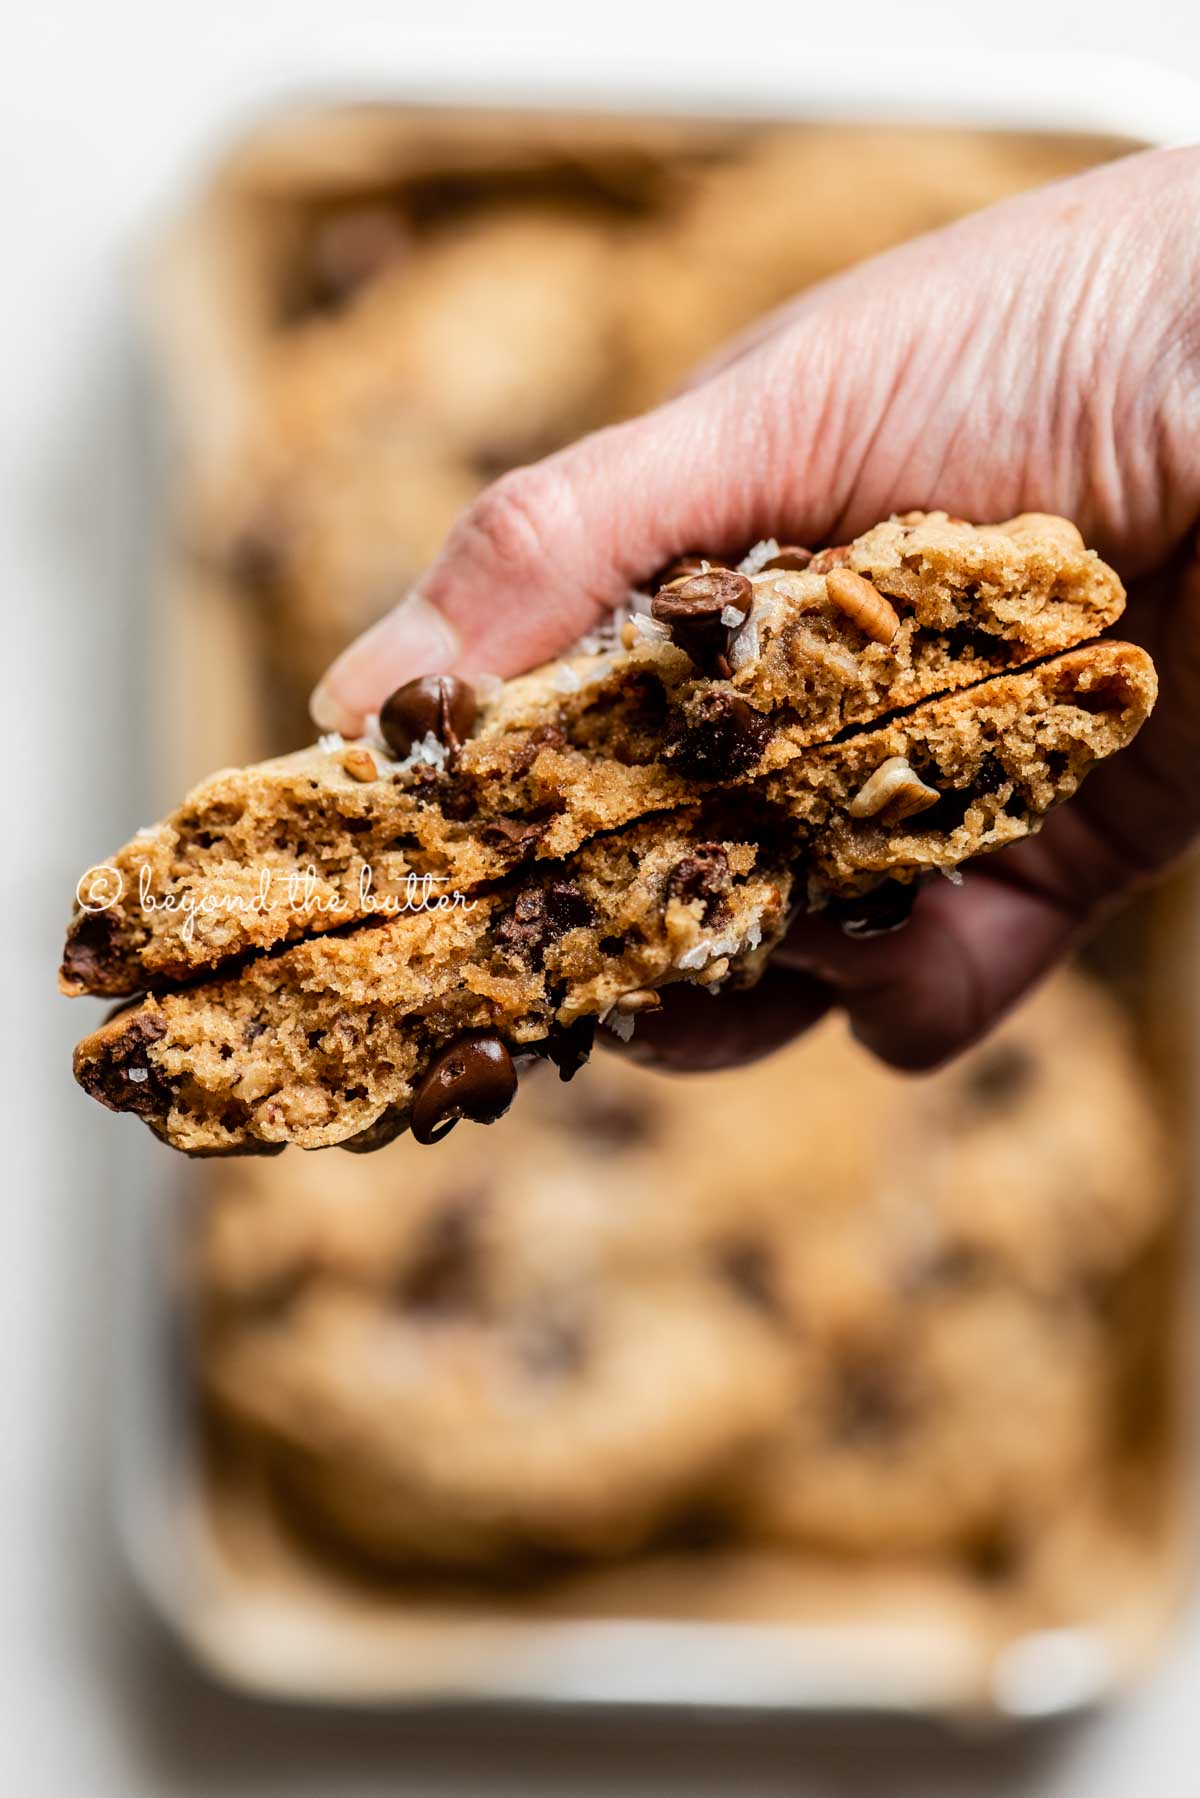 Hand holding a large almond butter chocolate chip pecan cookie that's been split in half | All images © Beyond the Butter™